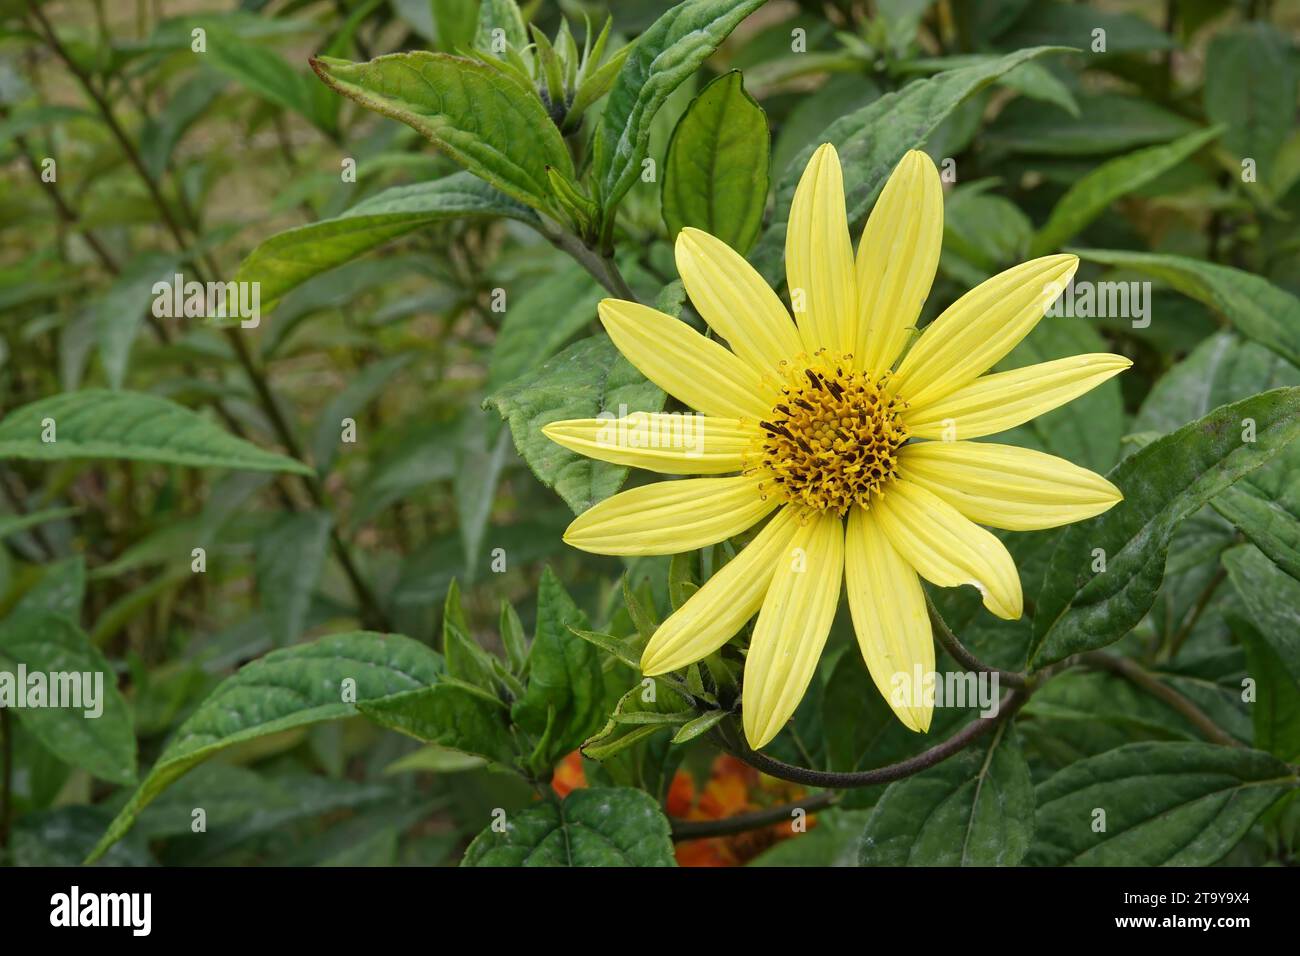 Natural closeup on a decentralized , bright yellow flowering swamp sunflower, Helianthus angustifolius flower in the garden Stock Photo